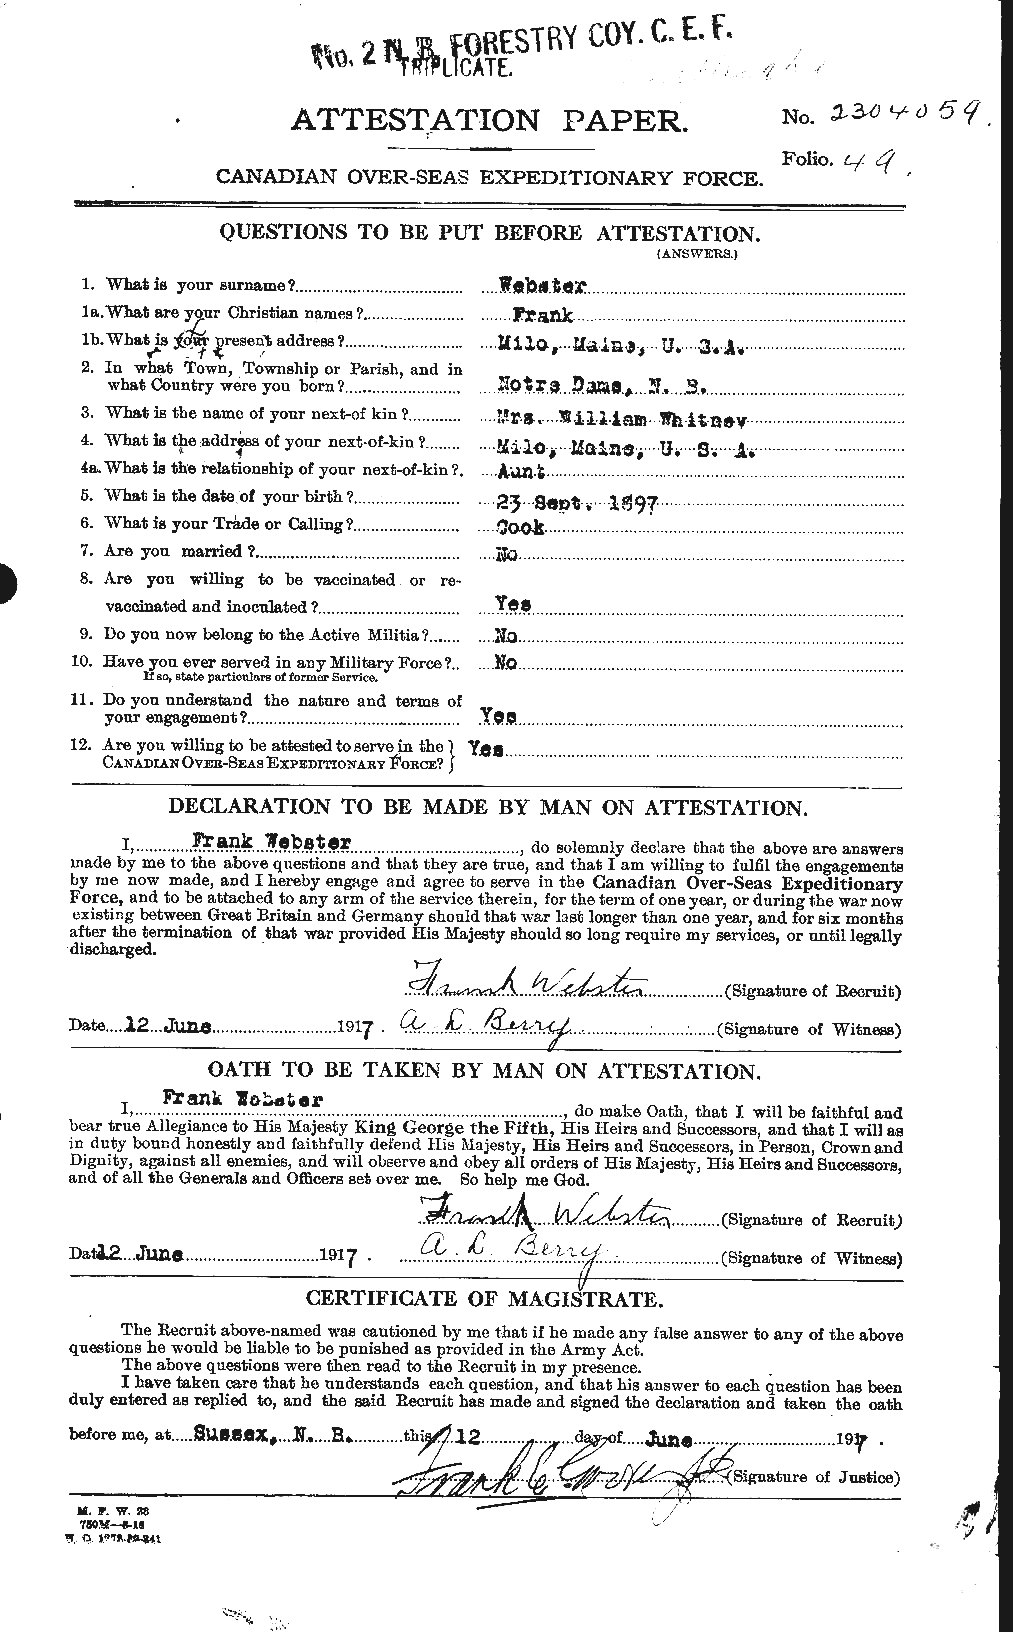 Personnel Records of the First World War - CEF 670350a